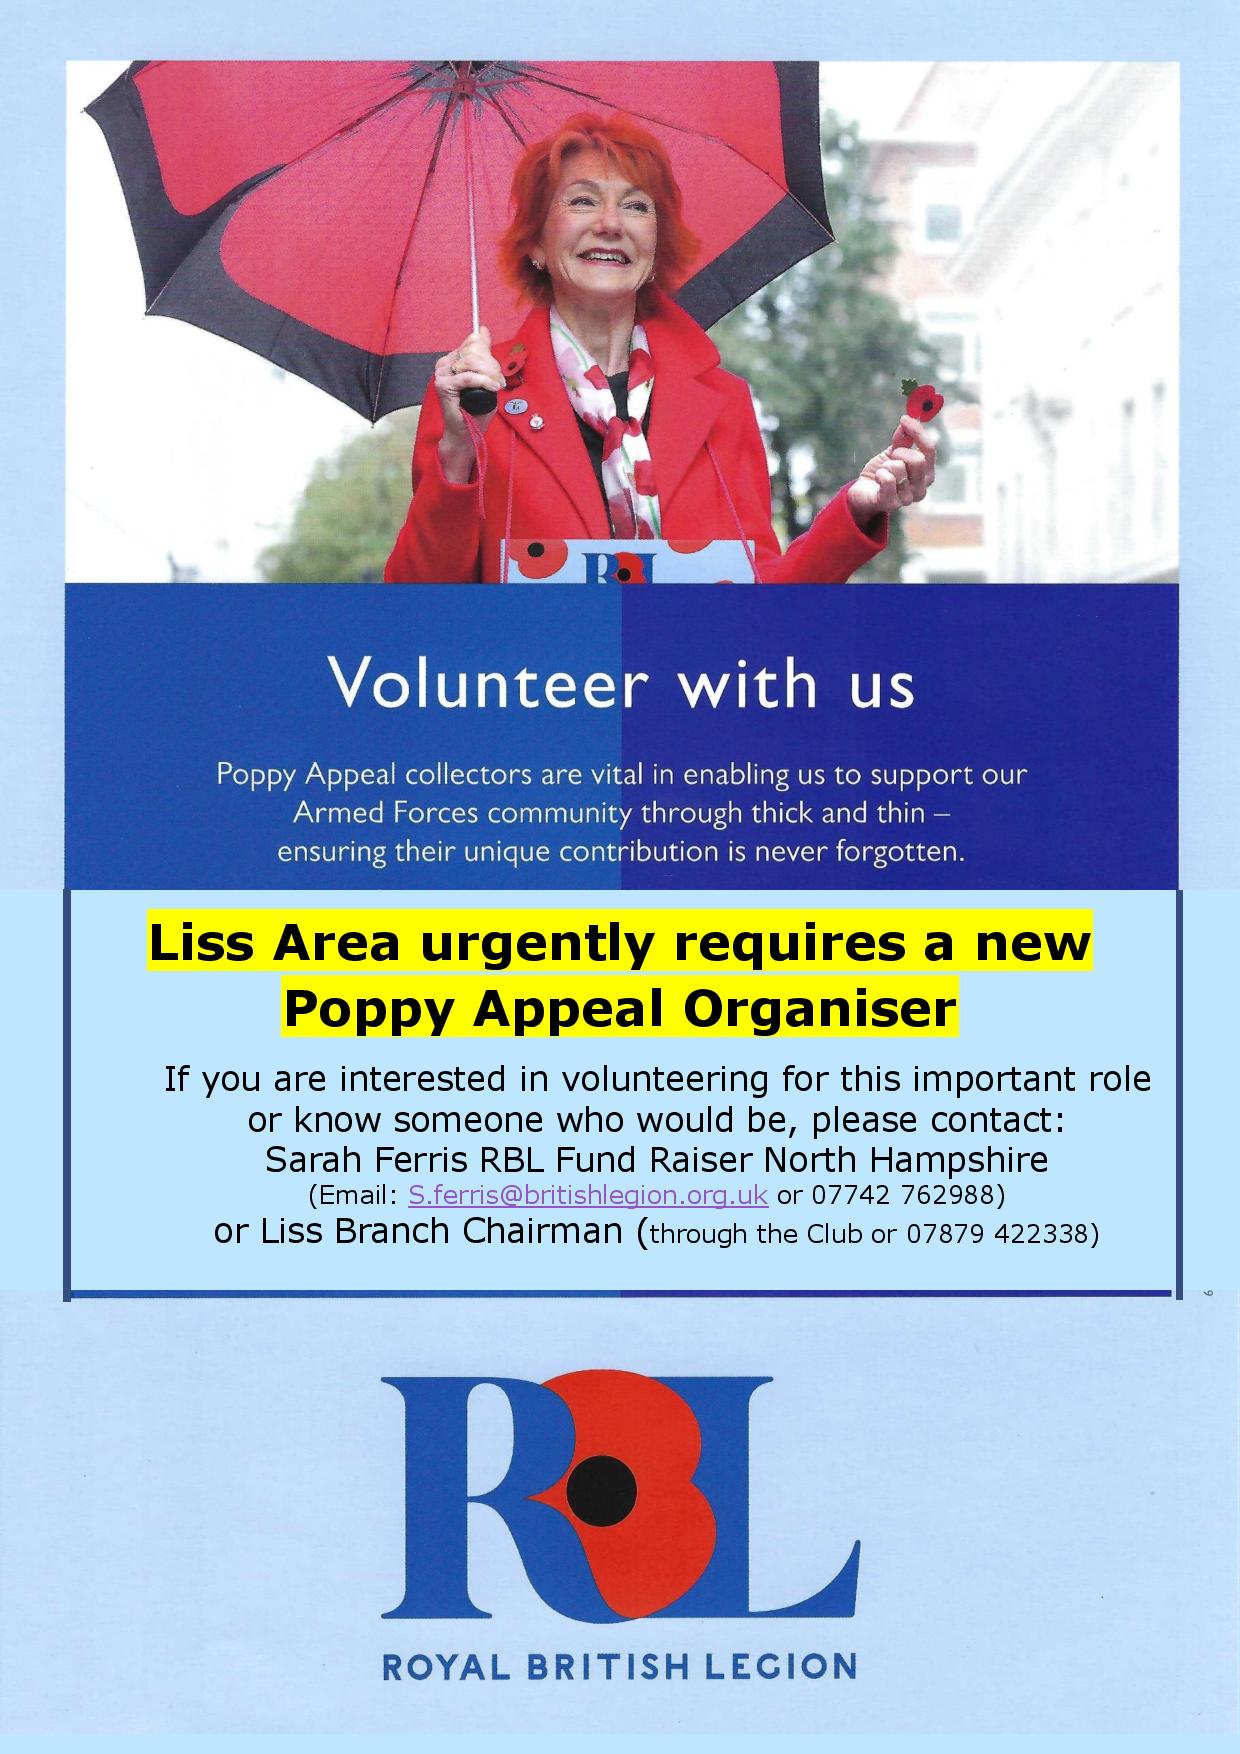 Liss Area urgently requires a new Poppy Appeal Organiser